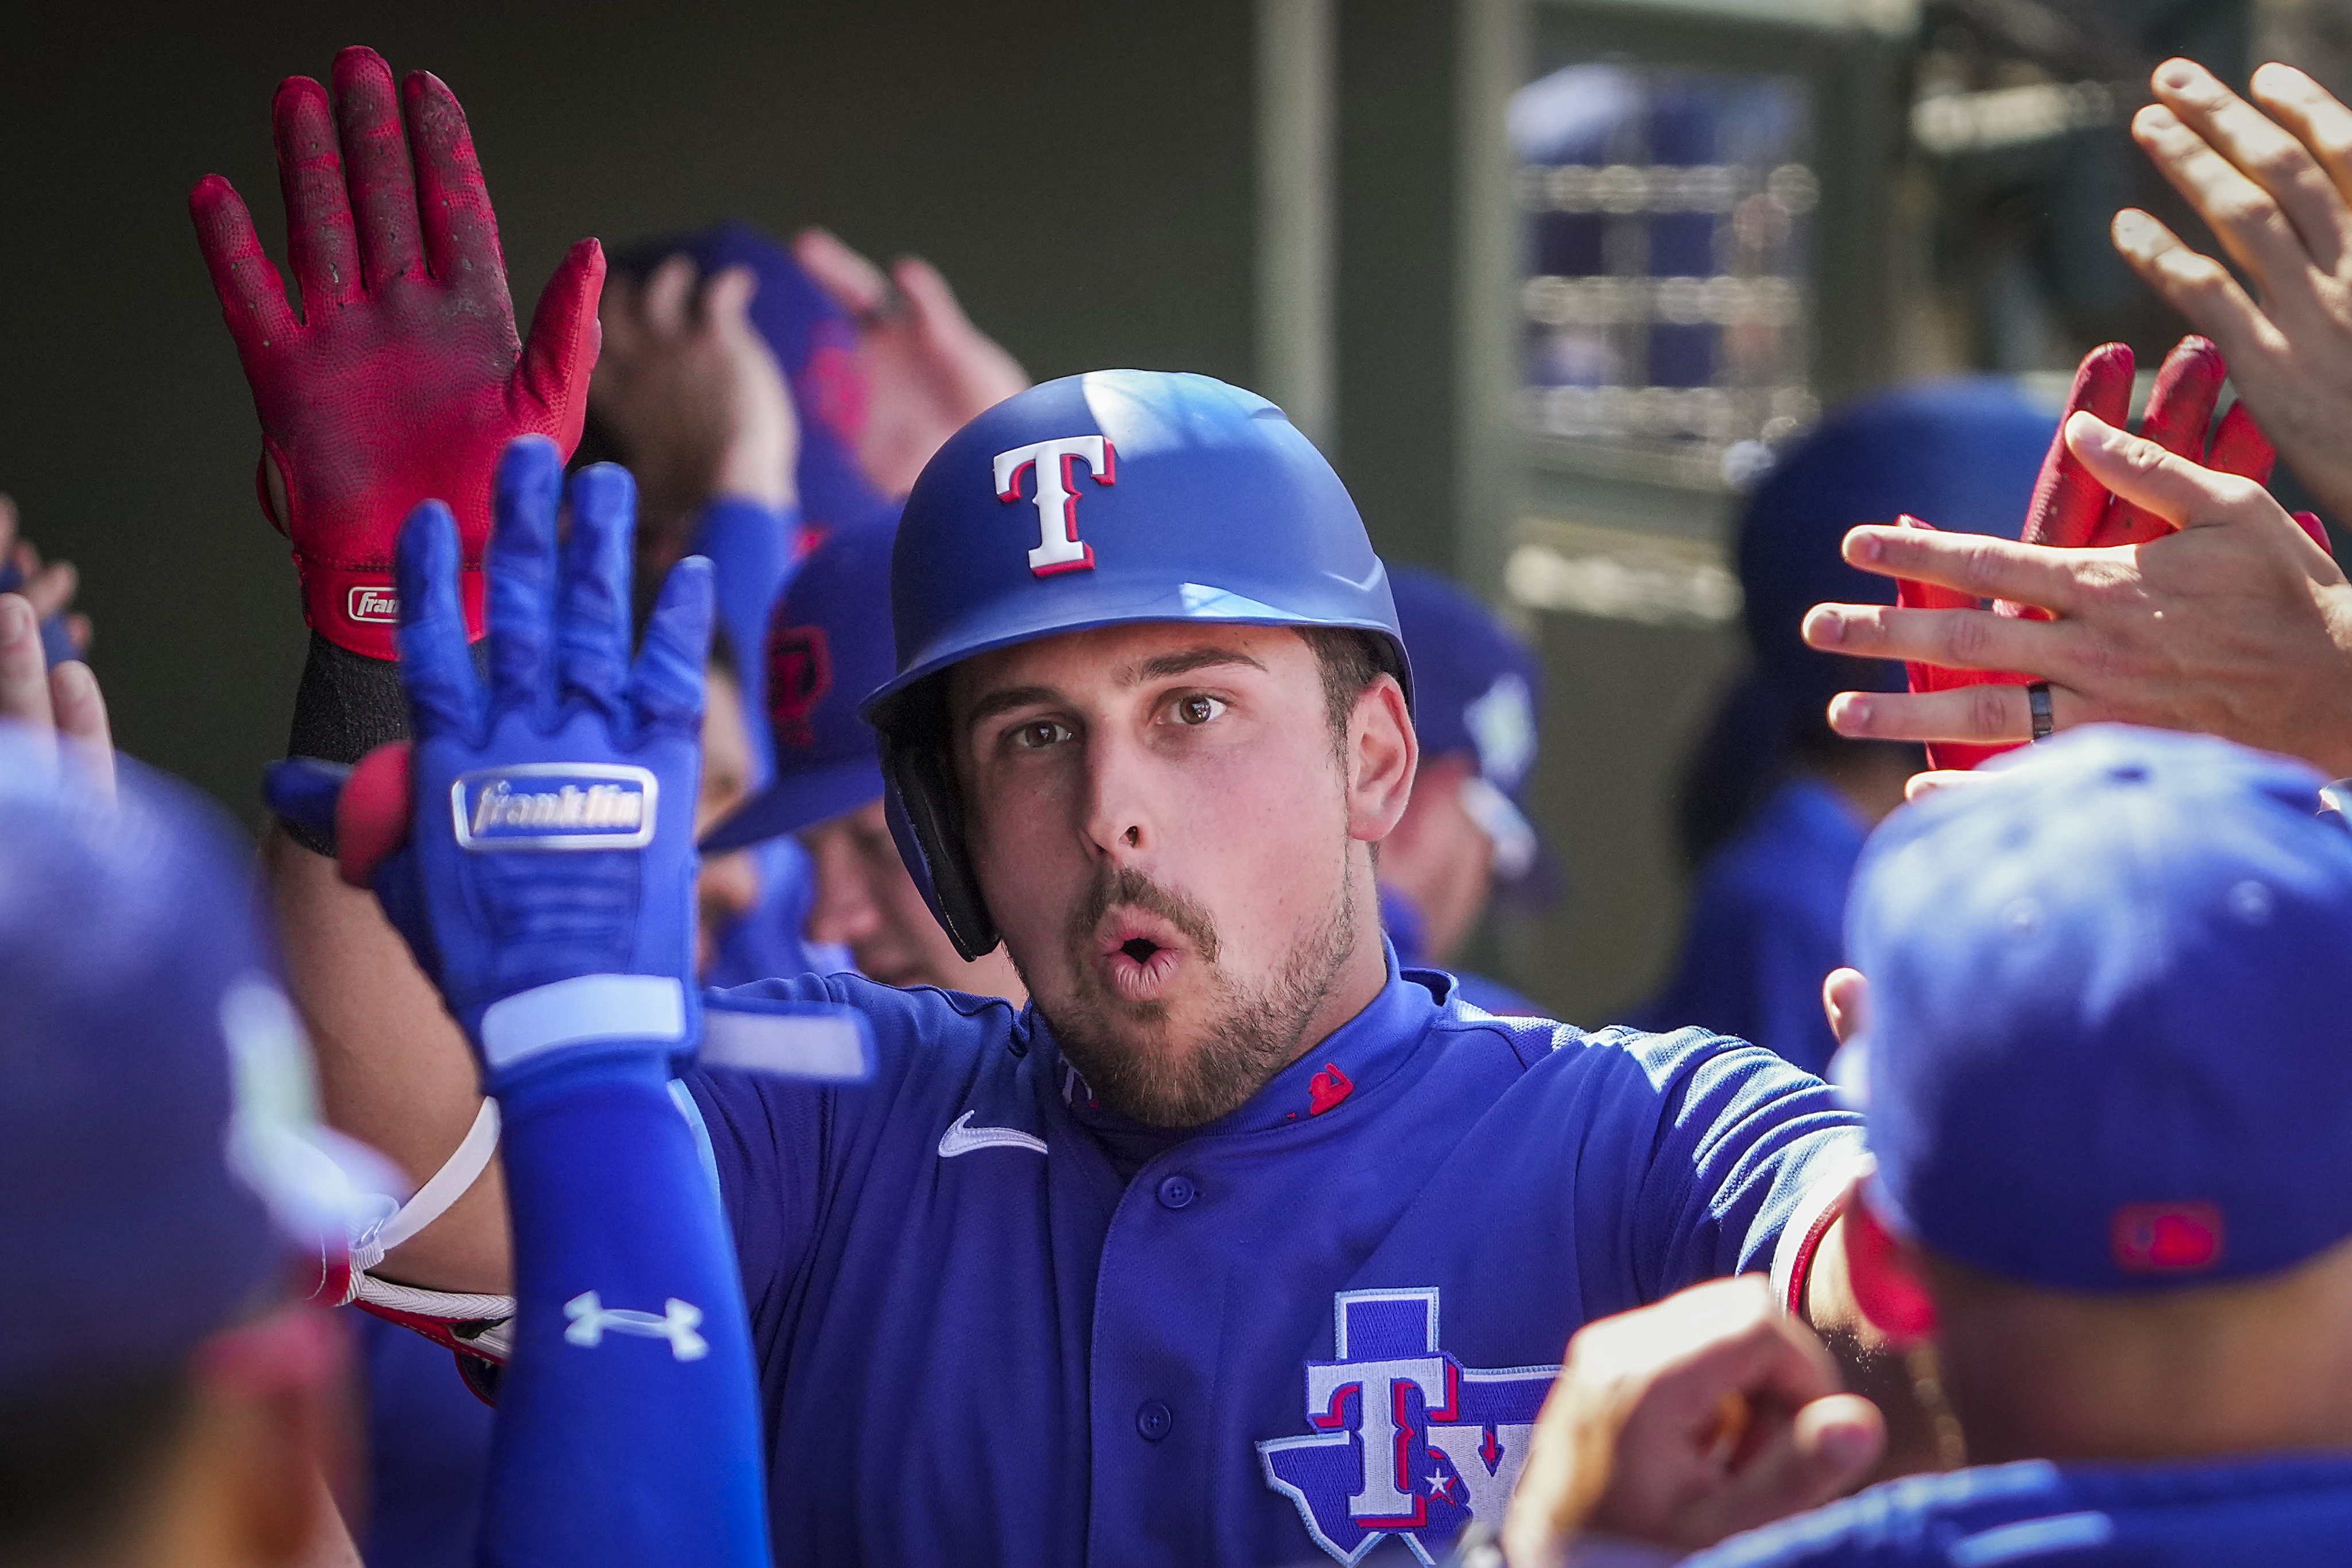 Did the Rangers Splurge on Free Agents to Boost Their